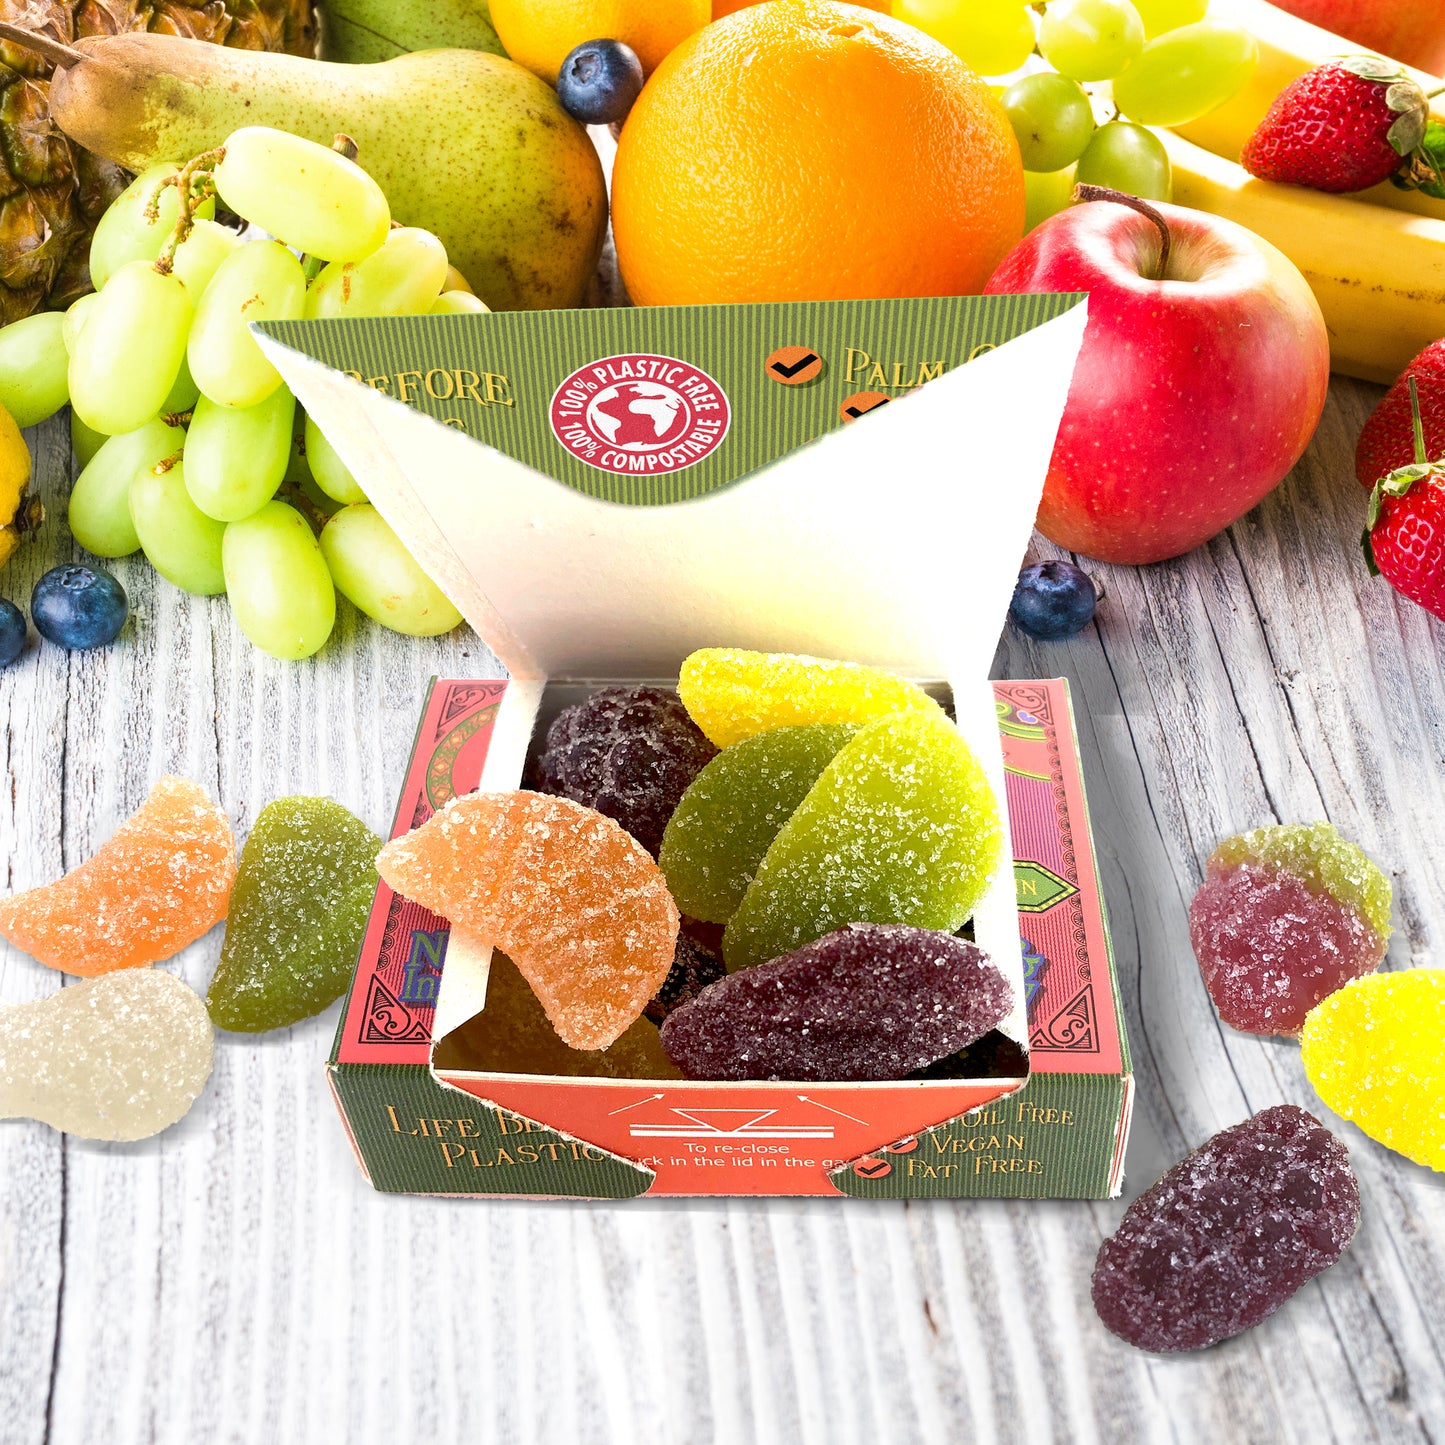 Vegan Traditional Assorted Fruit Jelly Sweets (Pack of 10 x 70g)